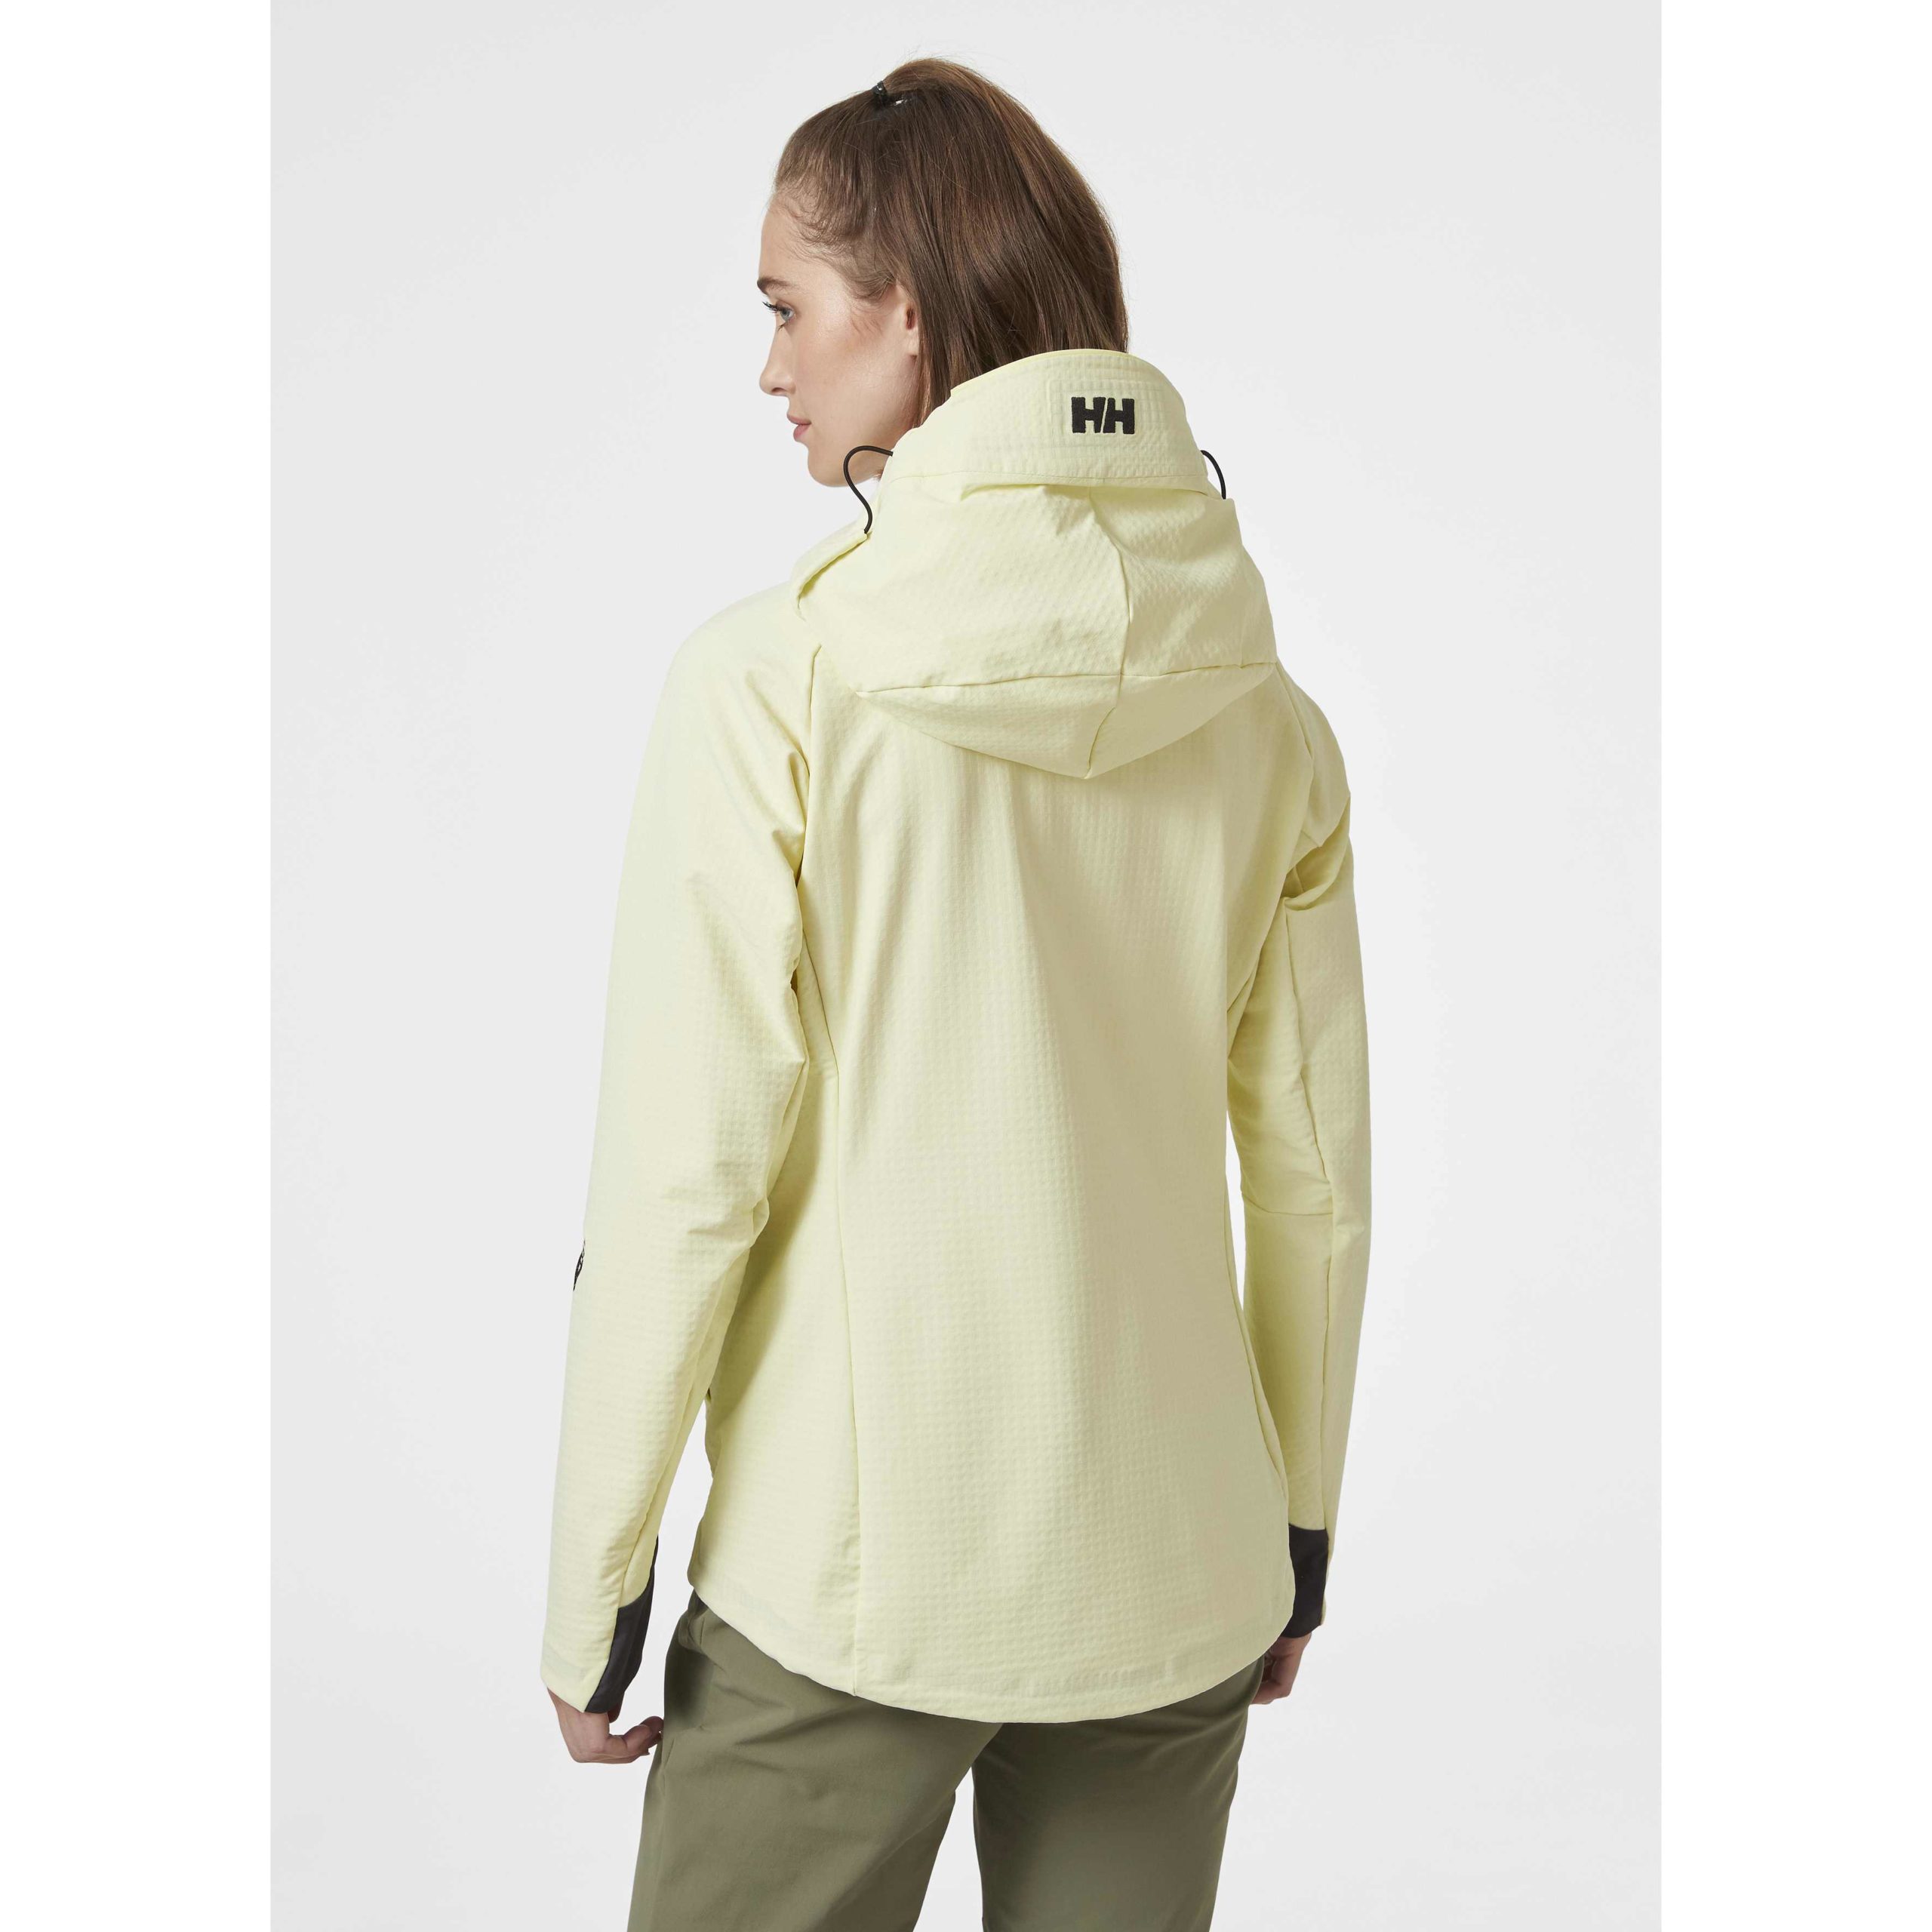 The Odin Pro Shield, A Jacket From Helly Hansen 